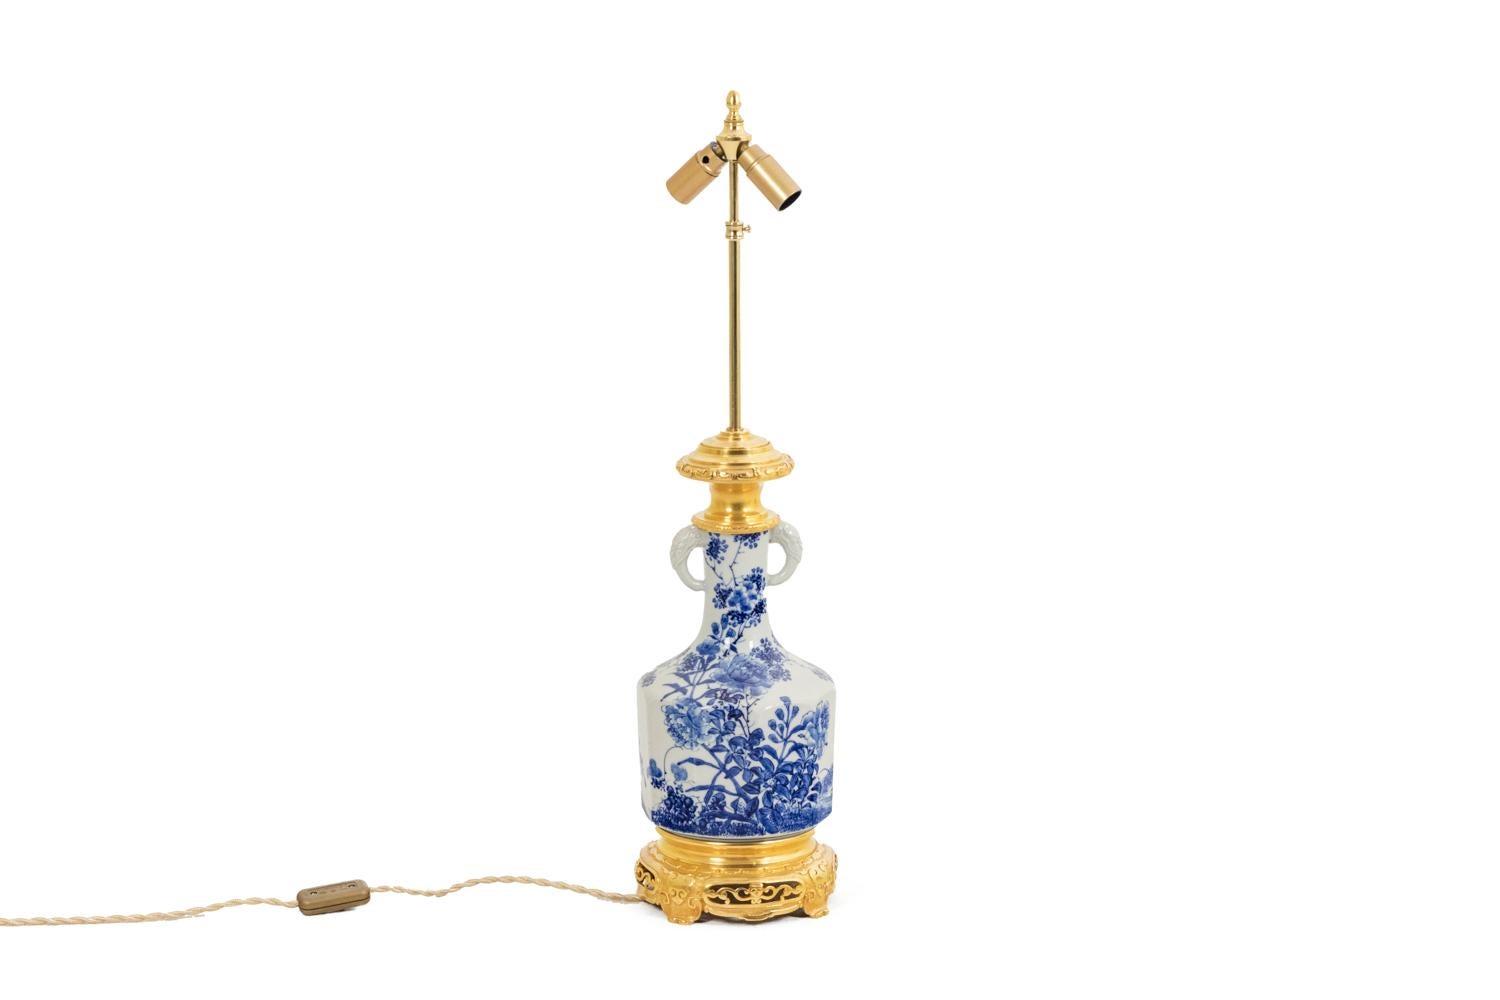 Baluster-shaped Japanese porcelain lamp with floral decoration, in blue tones. Gilt bronze mount. Quadripod base, top of the frame adorned with gilt rhinestones.

Work realized circa 1880.

New and functional electrical system.

!The price